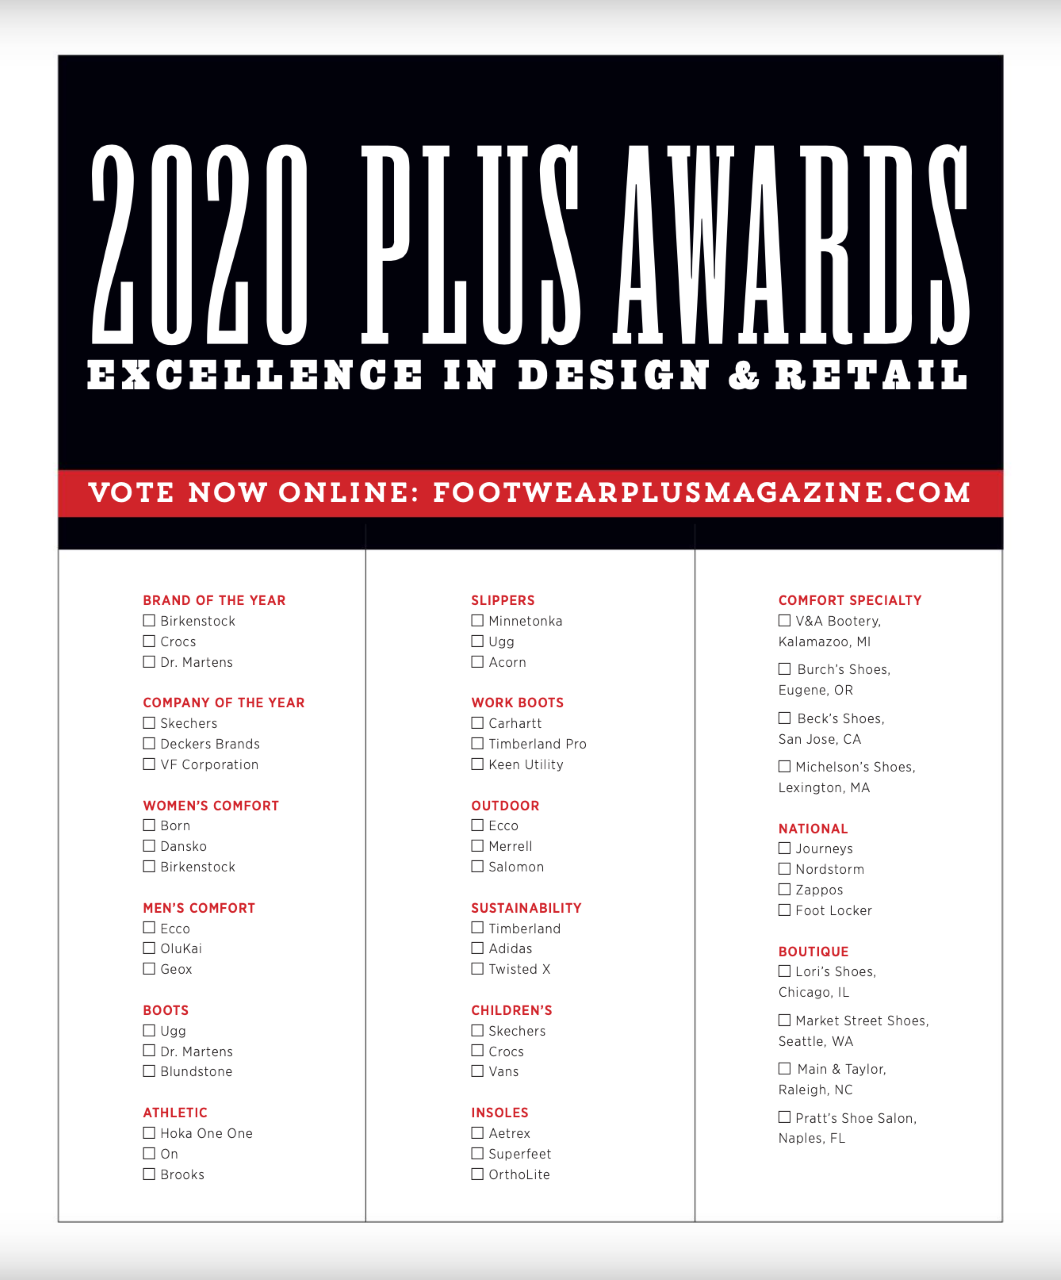 2020 Plus Awards: Excellence in Design